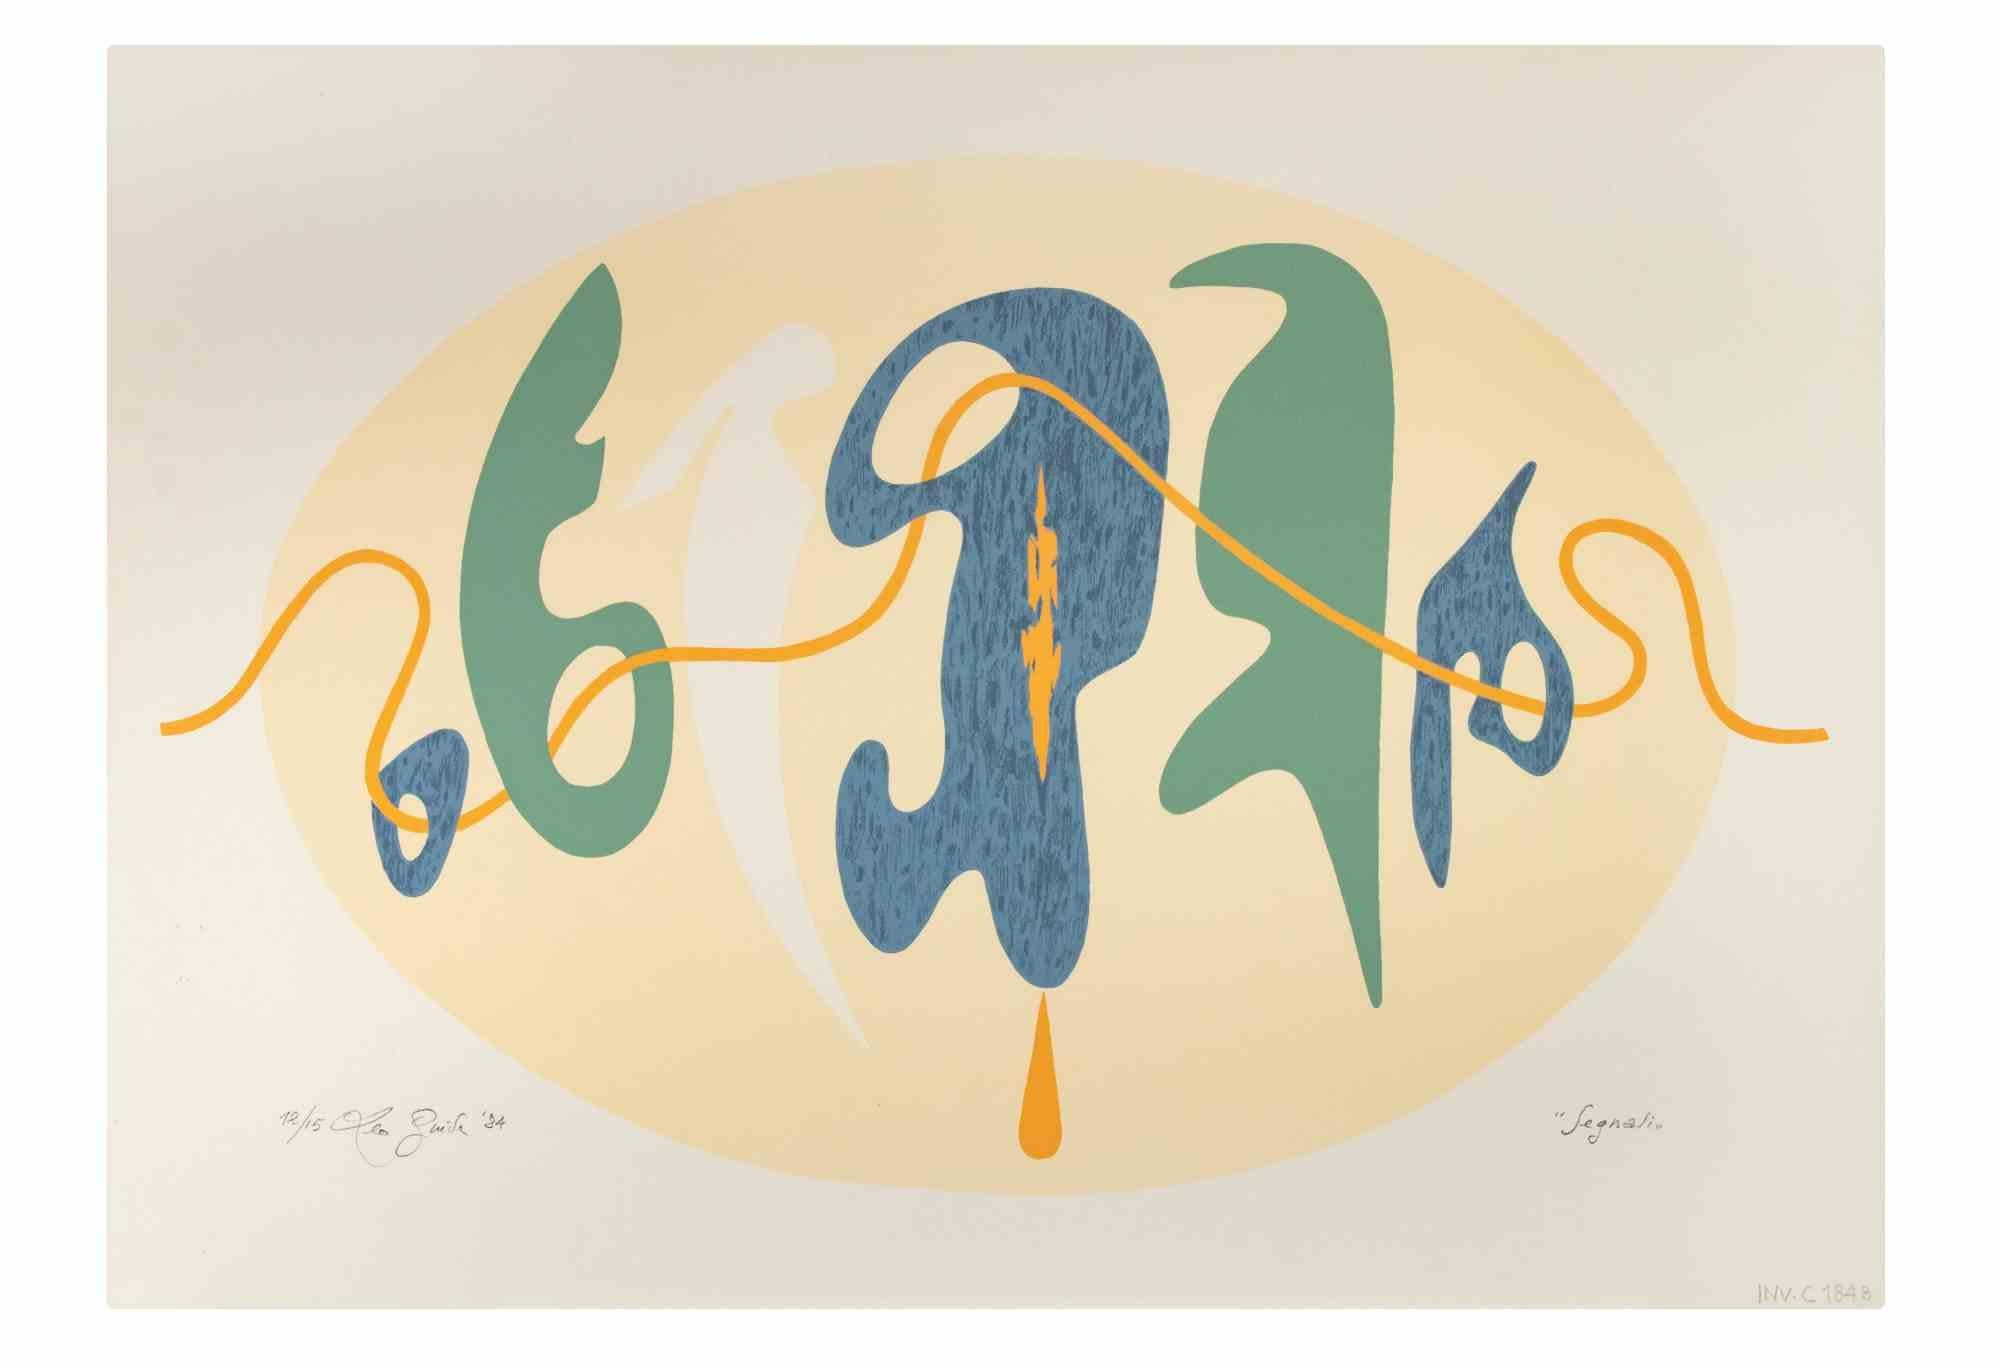 Segnali (Signals) is an artwork realized in 1984 by the Italian Contemporary artist  Leo Guida  (1992 - 2017). 

Original screen print on cardboard  Hand-signed on the lower left in pencil and dated. Titled on the right margin. Numbered on the lower